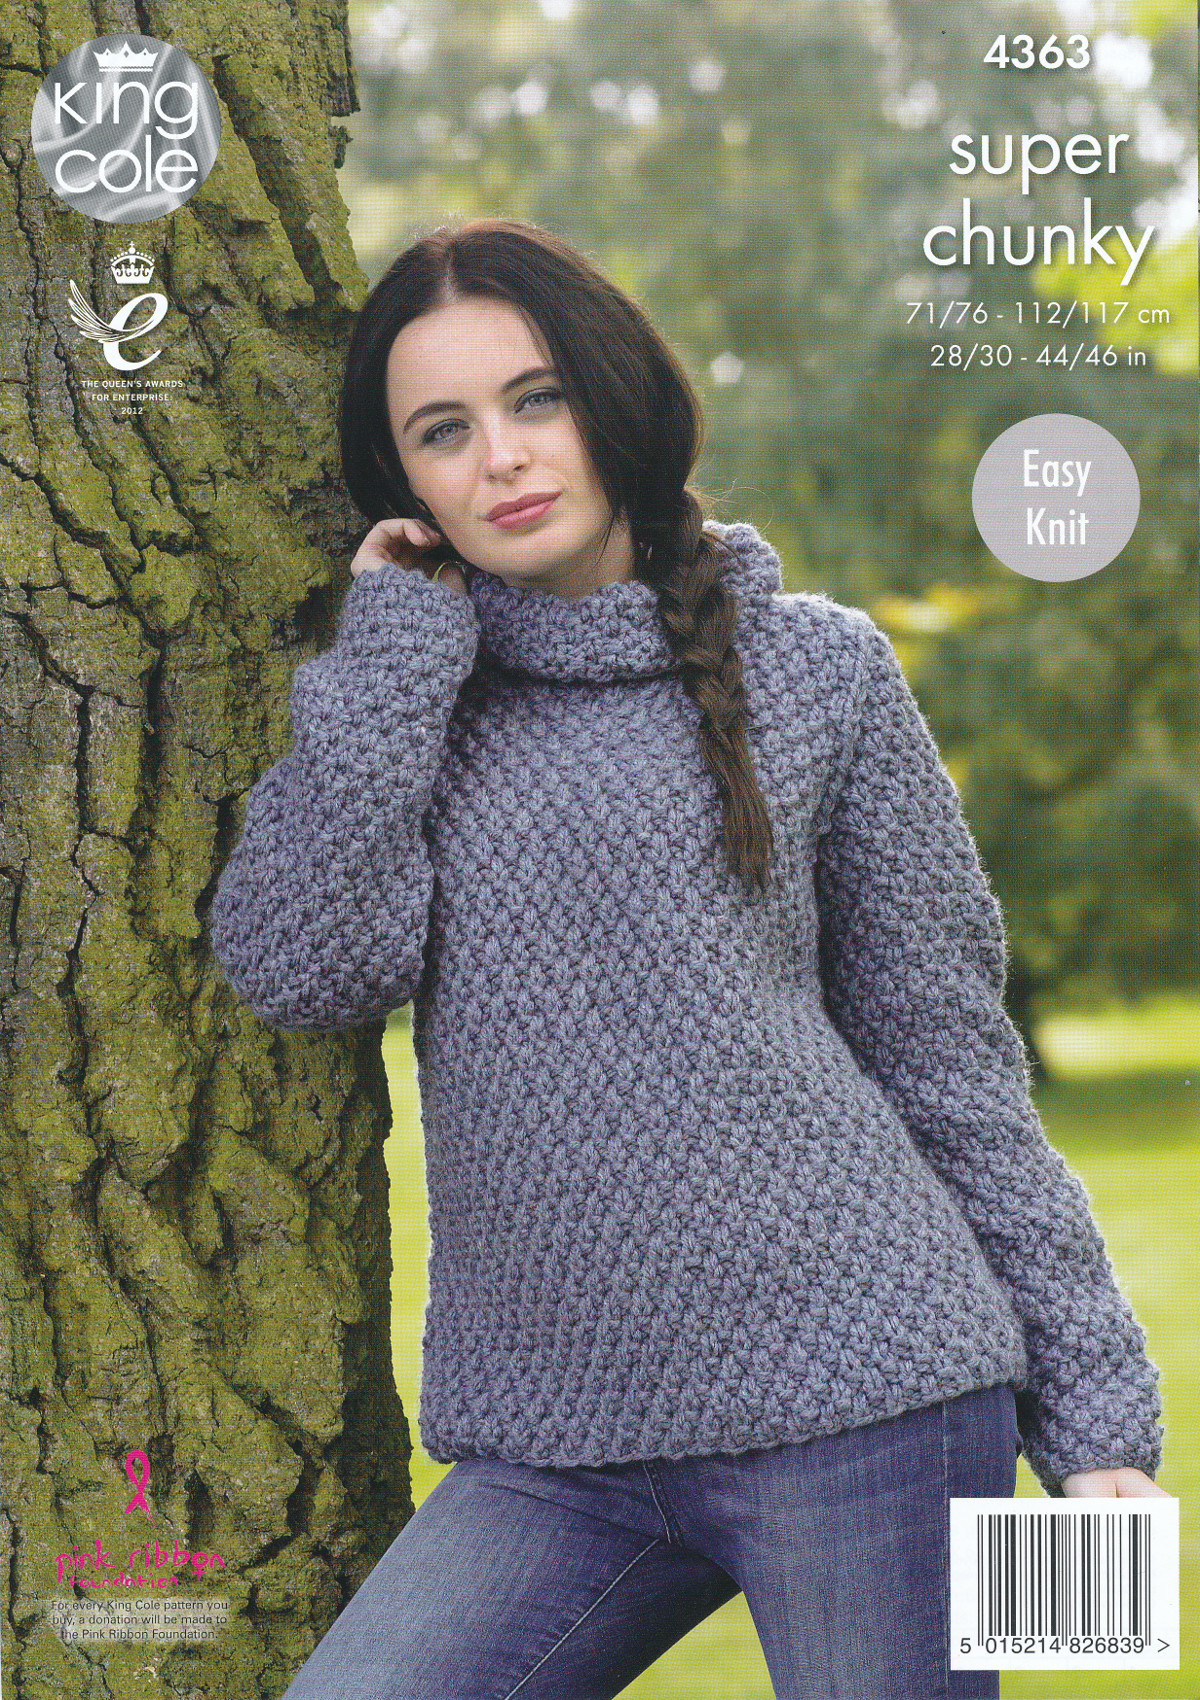 Knitted Jacket Patterns Details About Ladies Super Chunky Knitting Pattern King Cole Easy Knit Sweater Jacket 4363